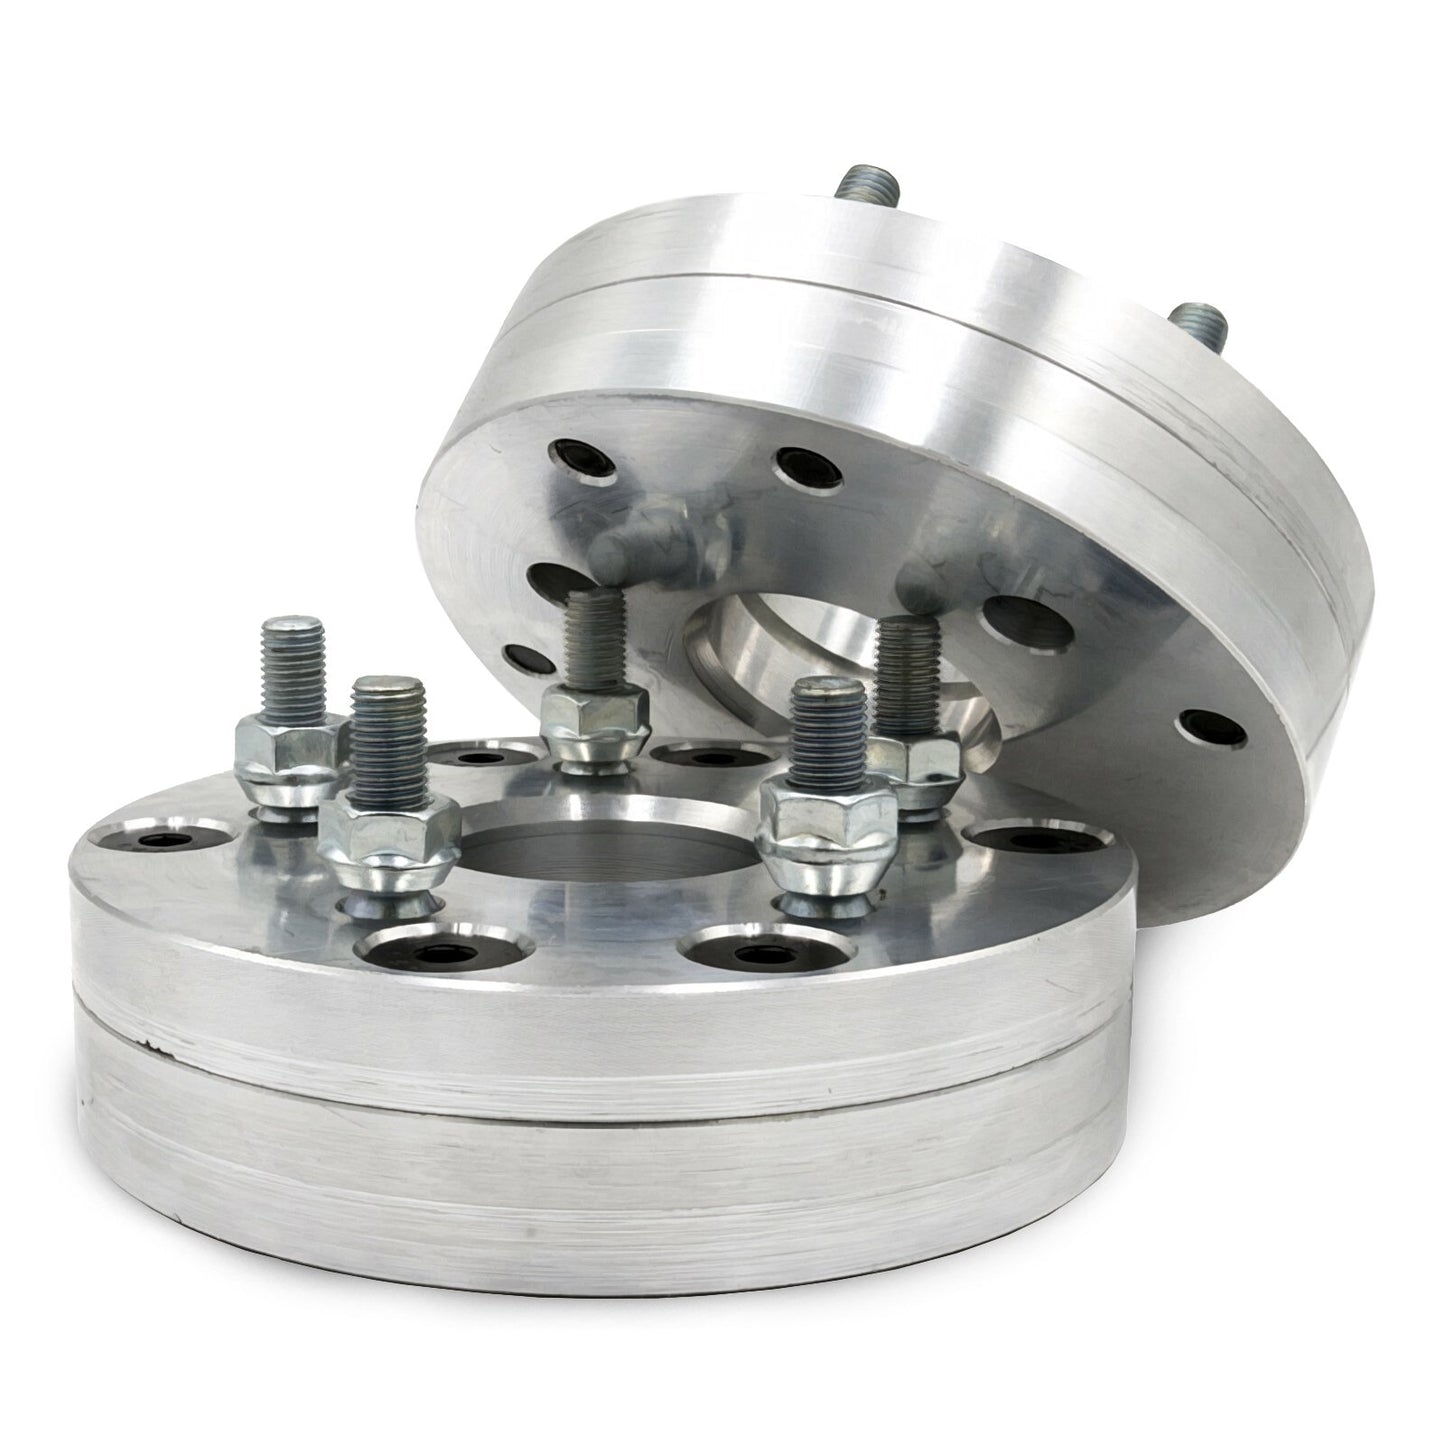 4x110 to 5x5" 2 piece Wheel Adapter - Thickness: 1.5" - 3"